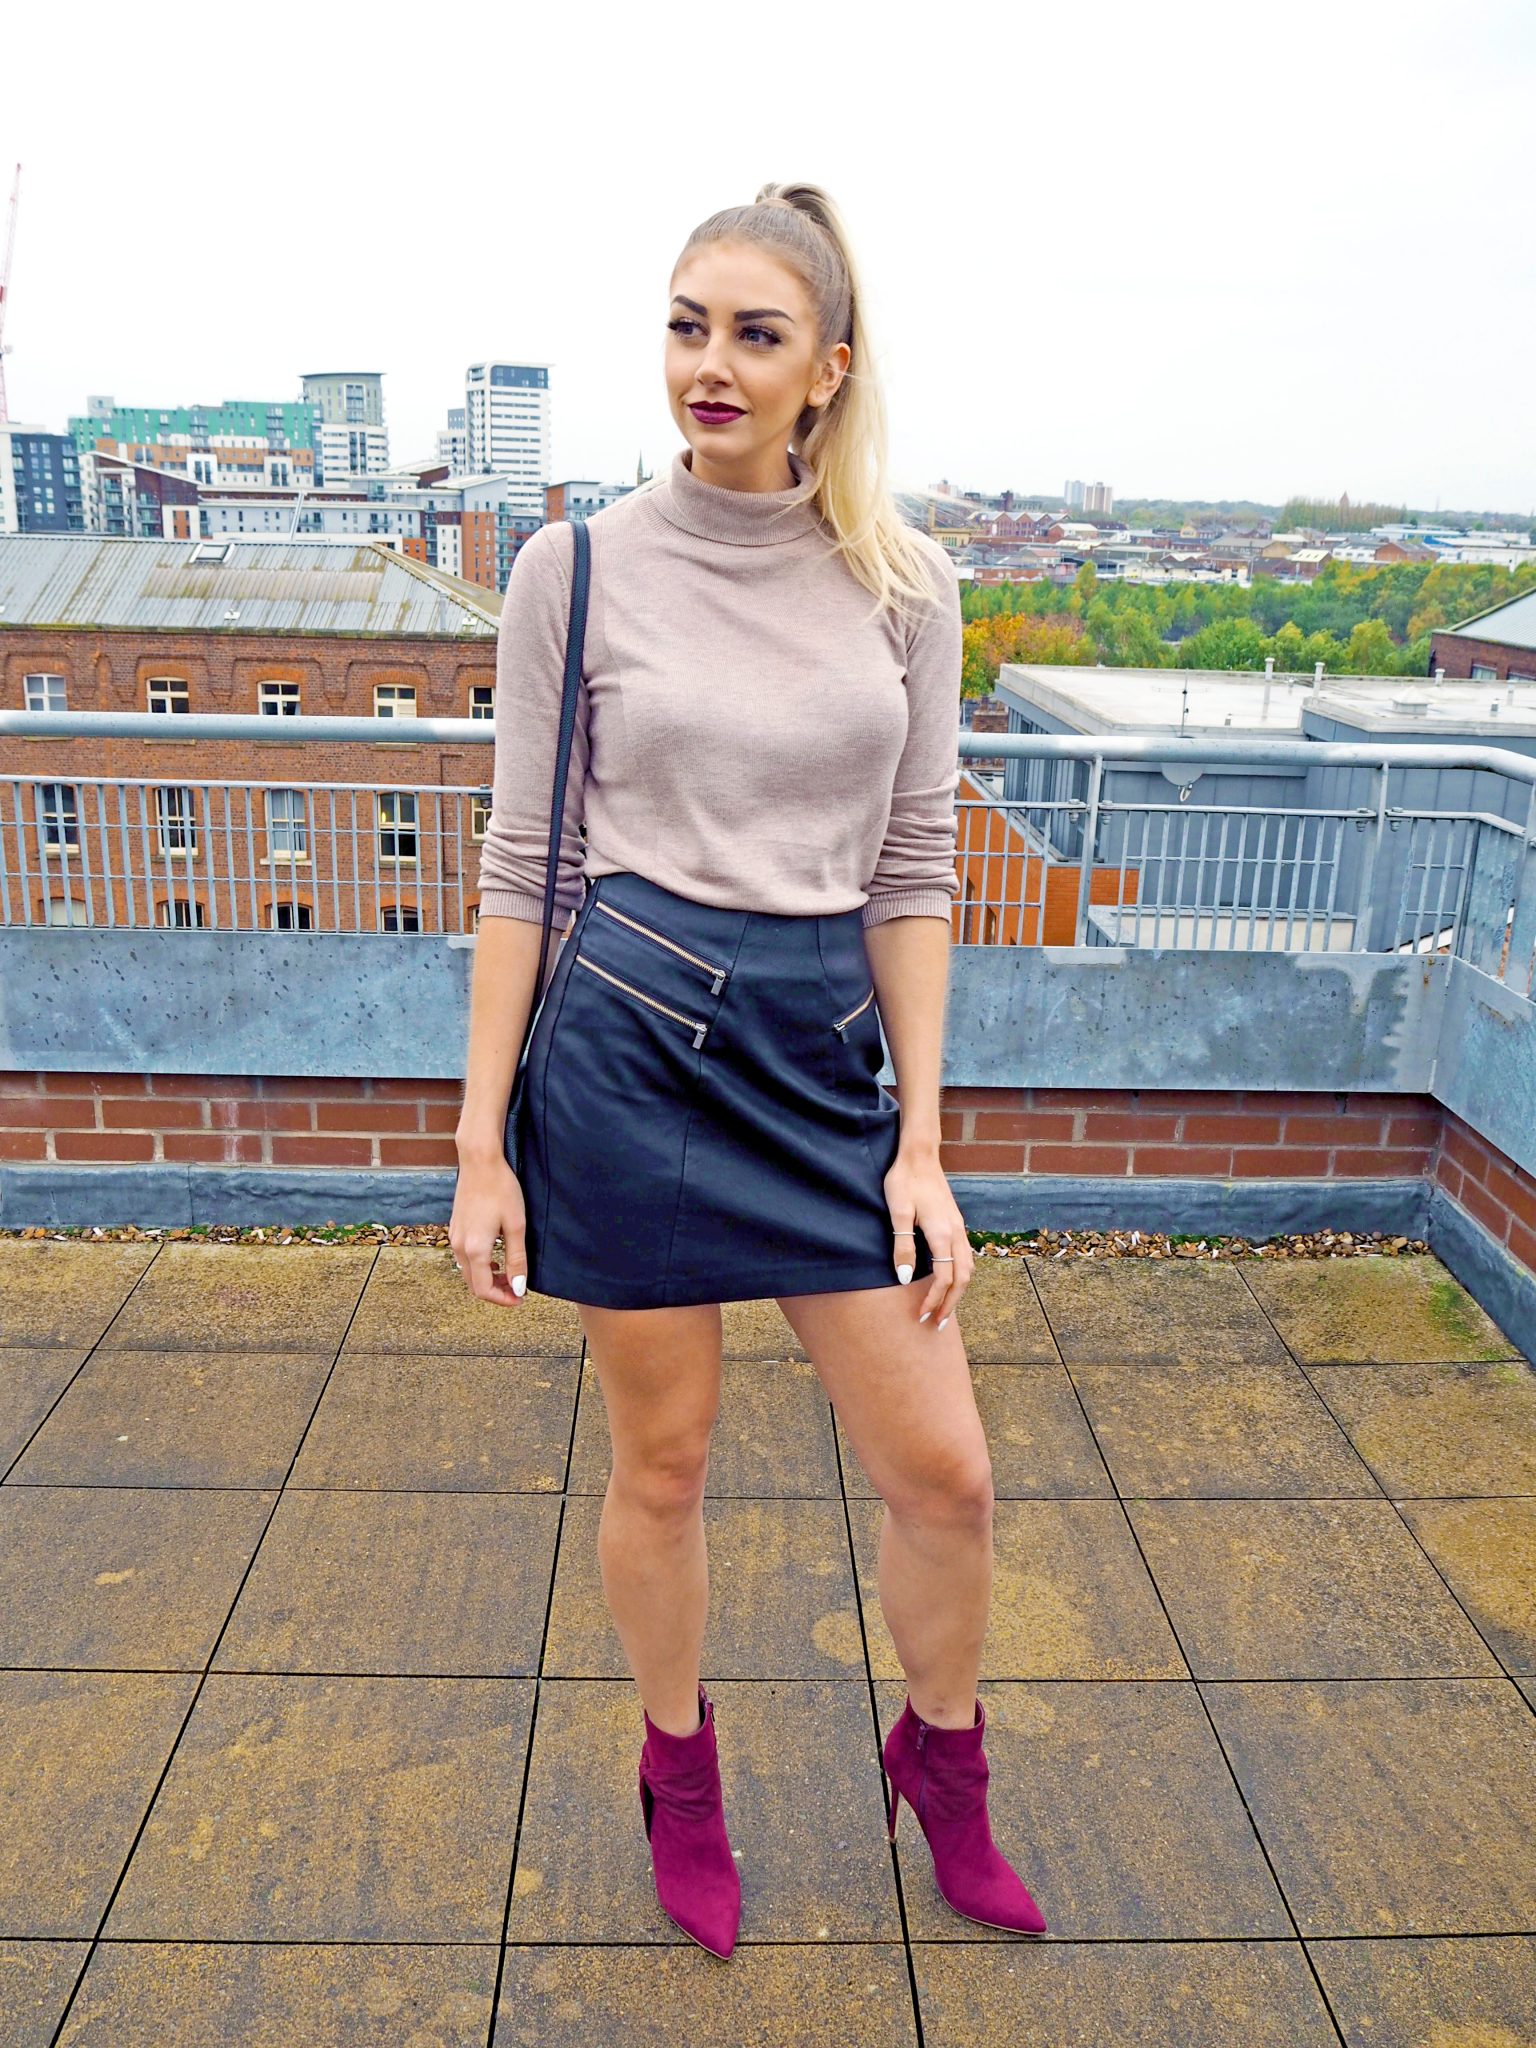 Laura Kate Lucas - Manchester Fashion, Lifestyle an Fitness Blogger | JustFab UK Autumn Boots #thebootstory 